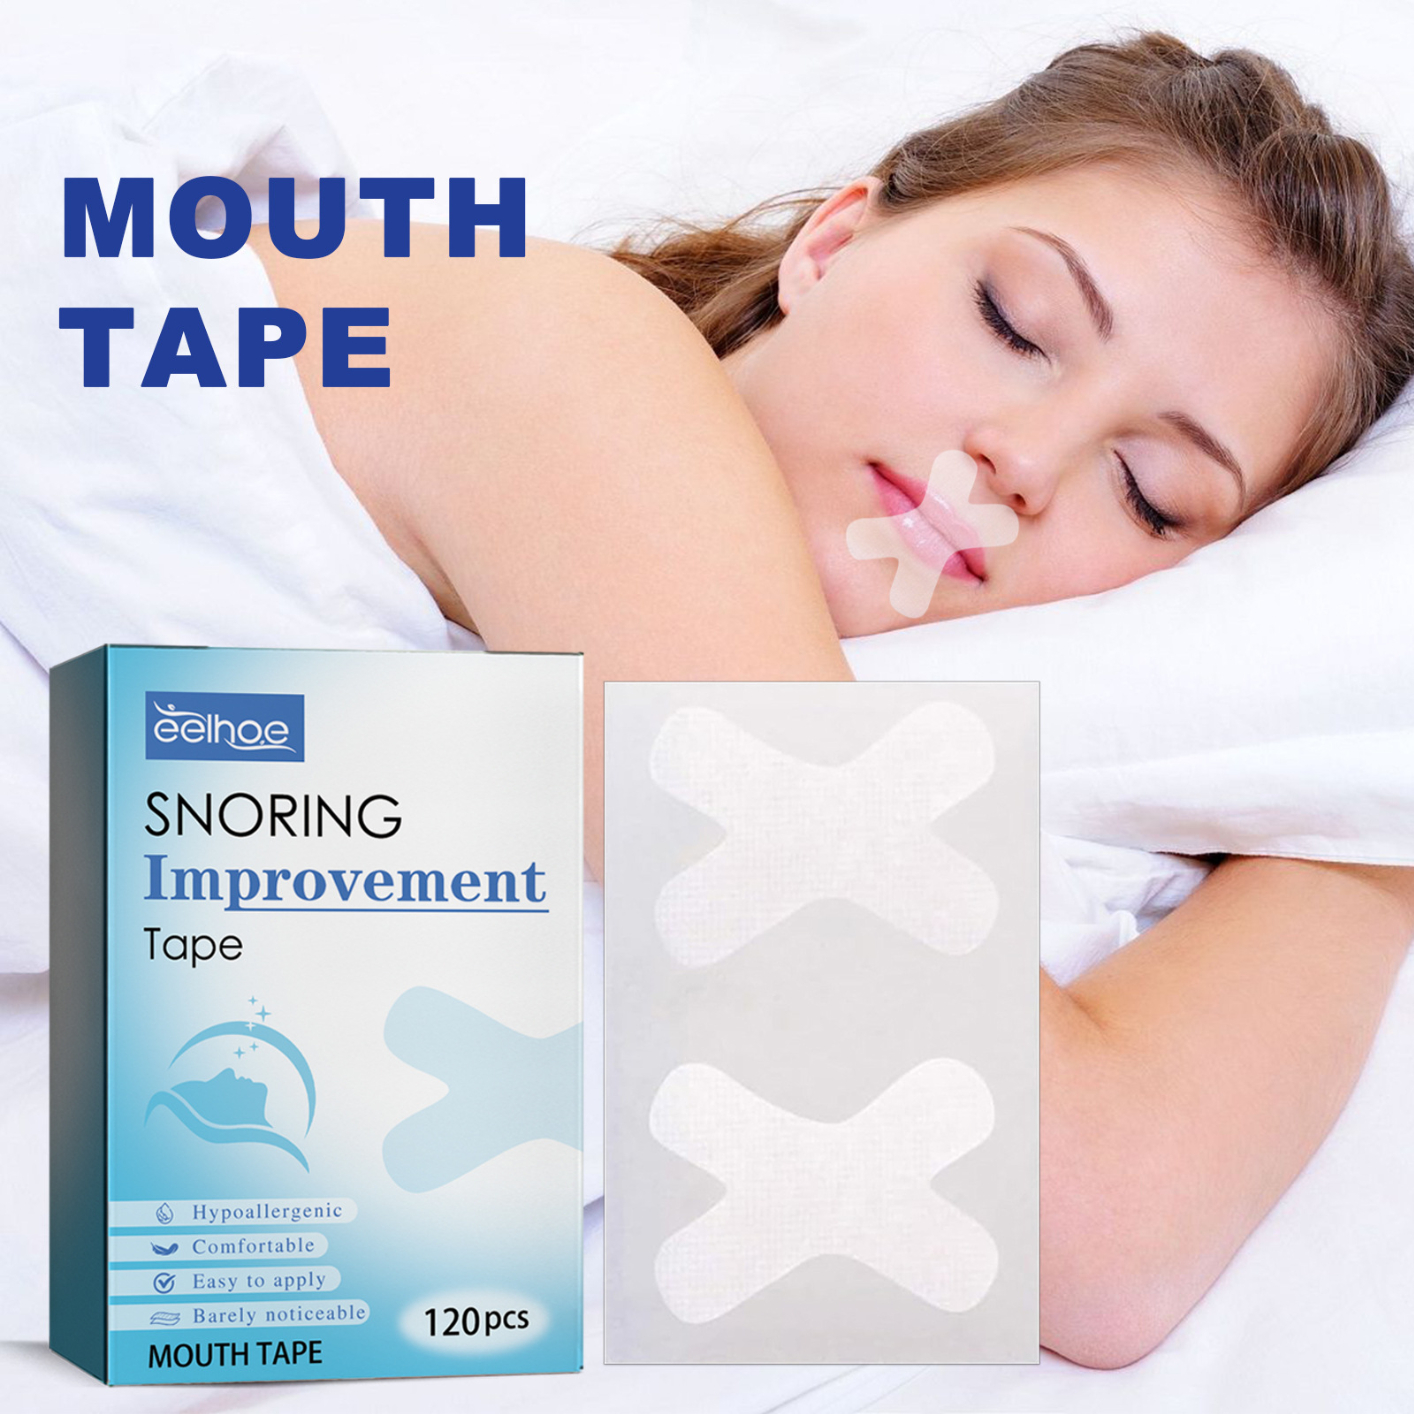 EELHOE Sleep Strips Tape for Sleeping-120PCS Better Nose Breathing Snoring Relief-Transparent Tape Strips-Pain Free Removal & Hypoallergic Tape 120PCS